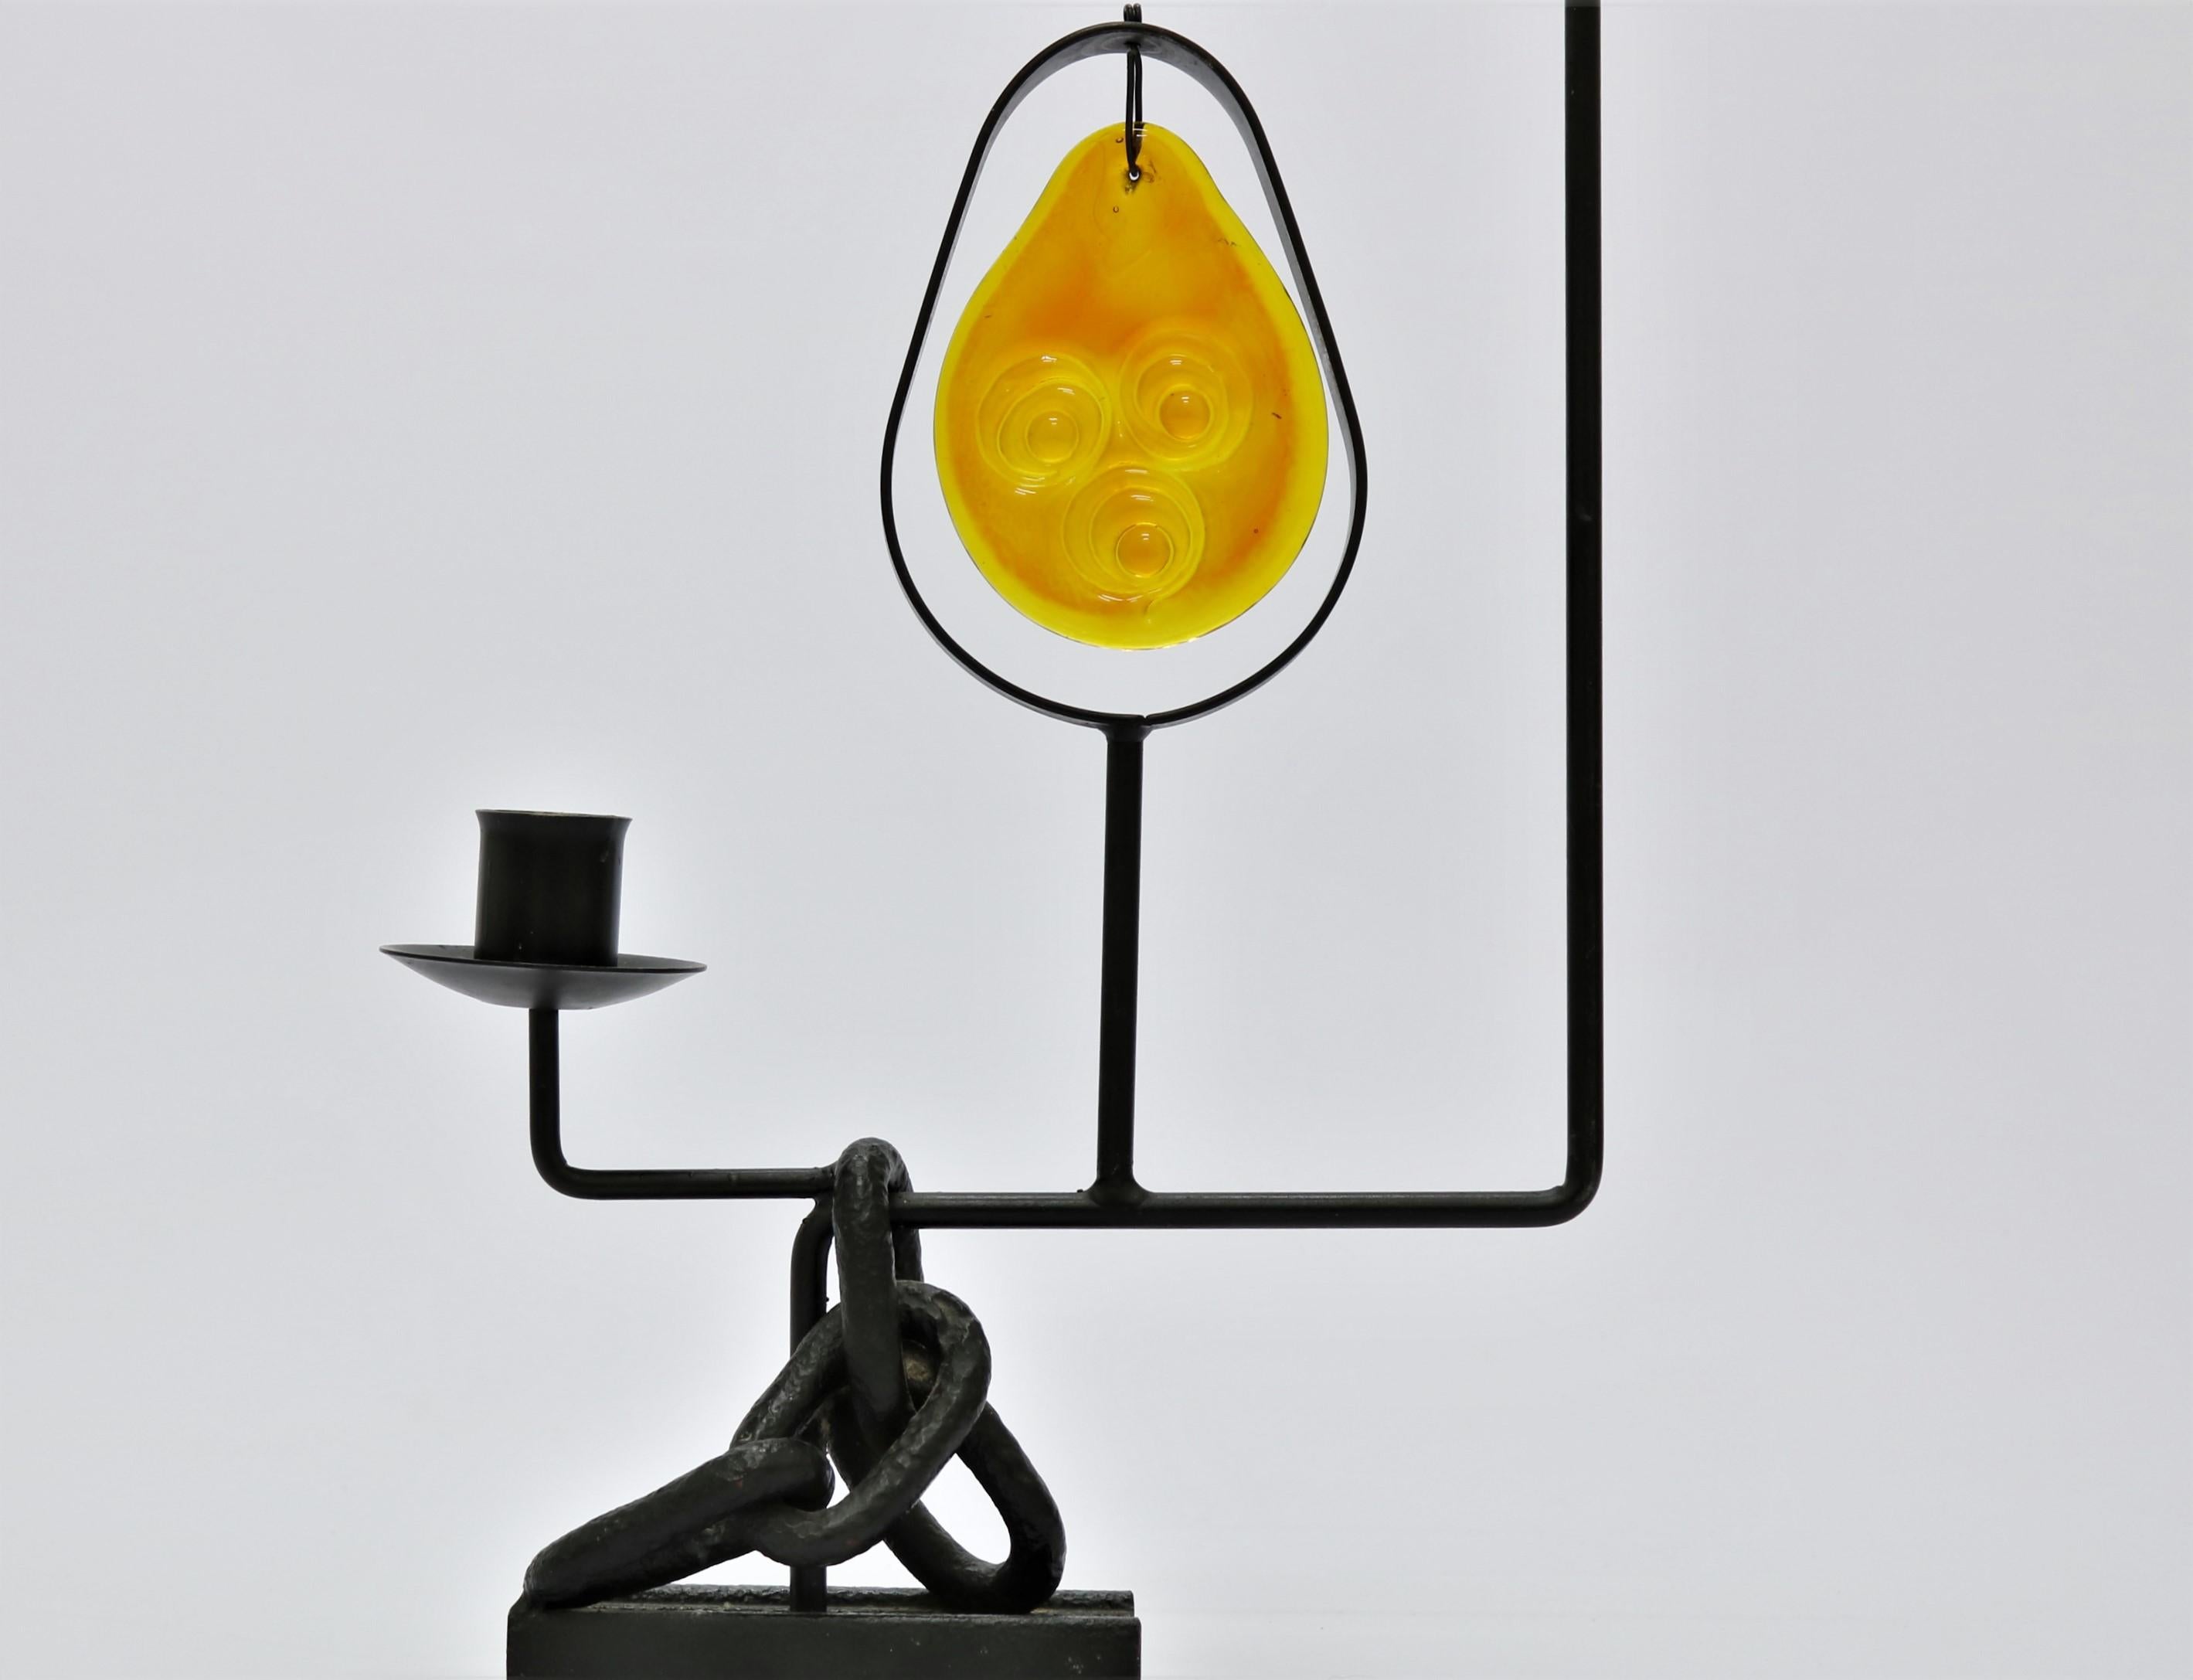 Unique piece of Brutalist style wrought iron floor sculpture with candleholder and beautiful orange suncatcher in thick handblown glass by Holmegaard Glasvaerk, Copenhagen. This piece of Brutalist Art was made in Denmark in the 1960s and bears